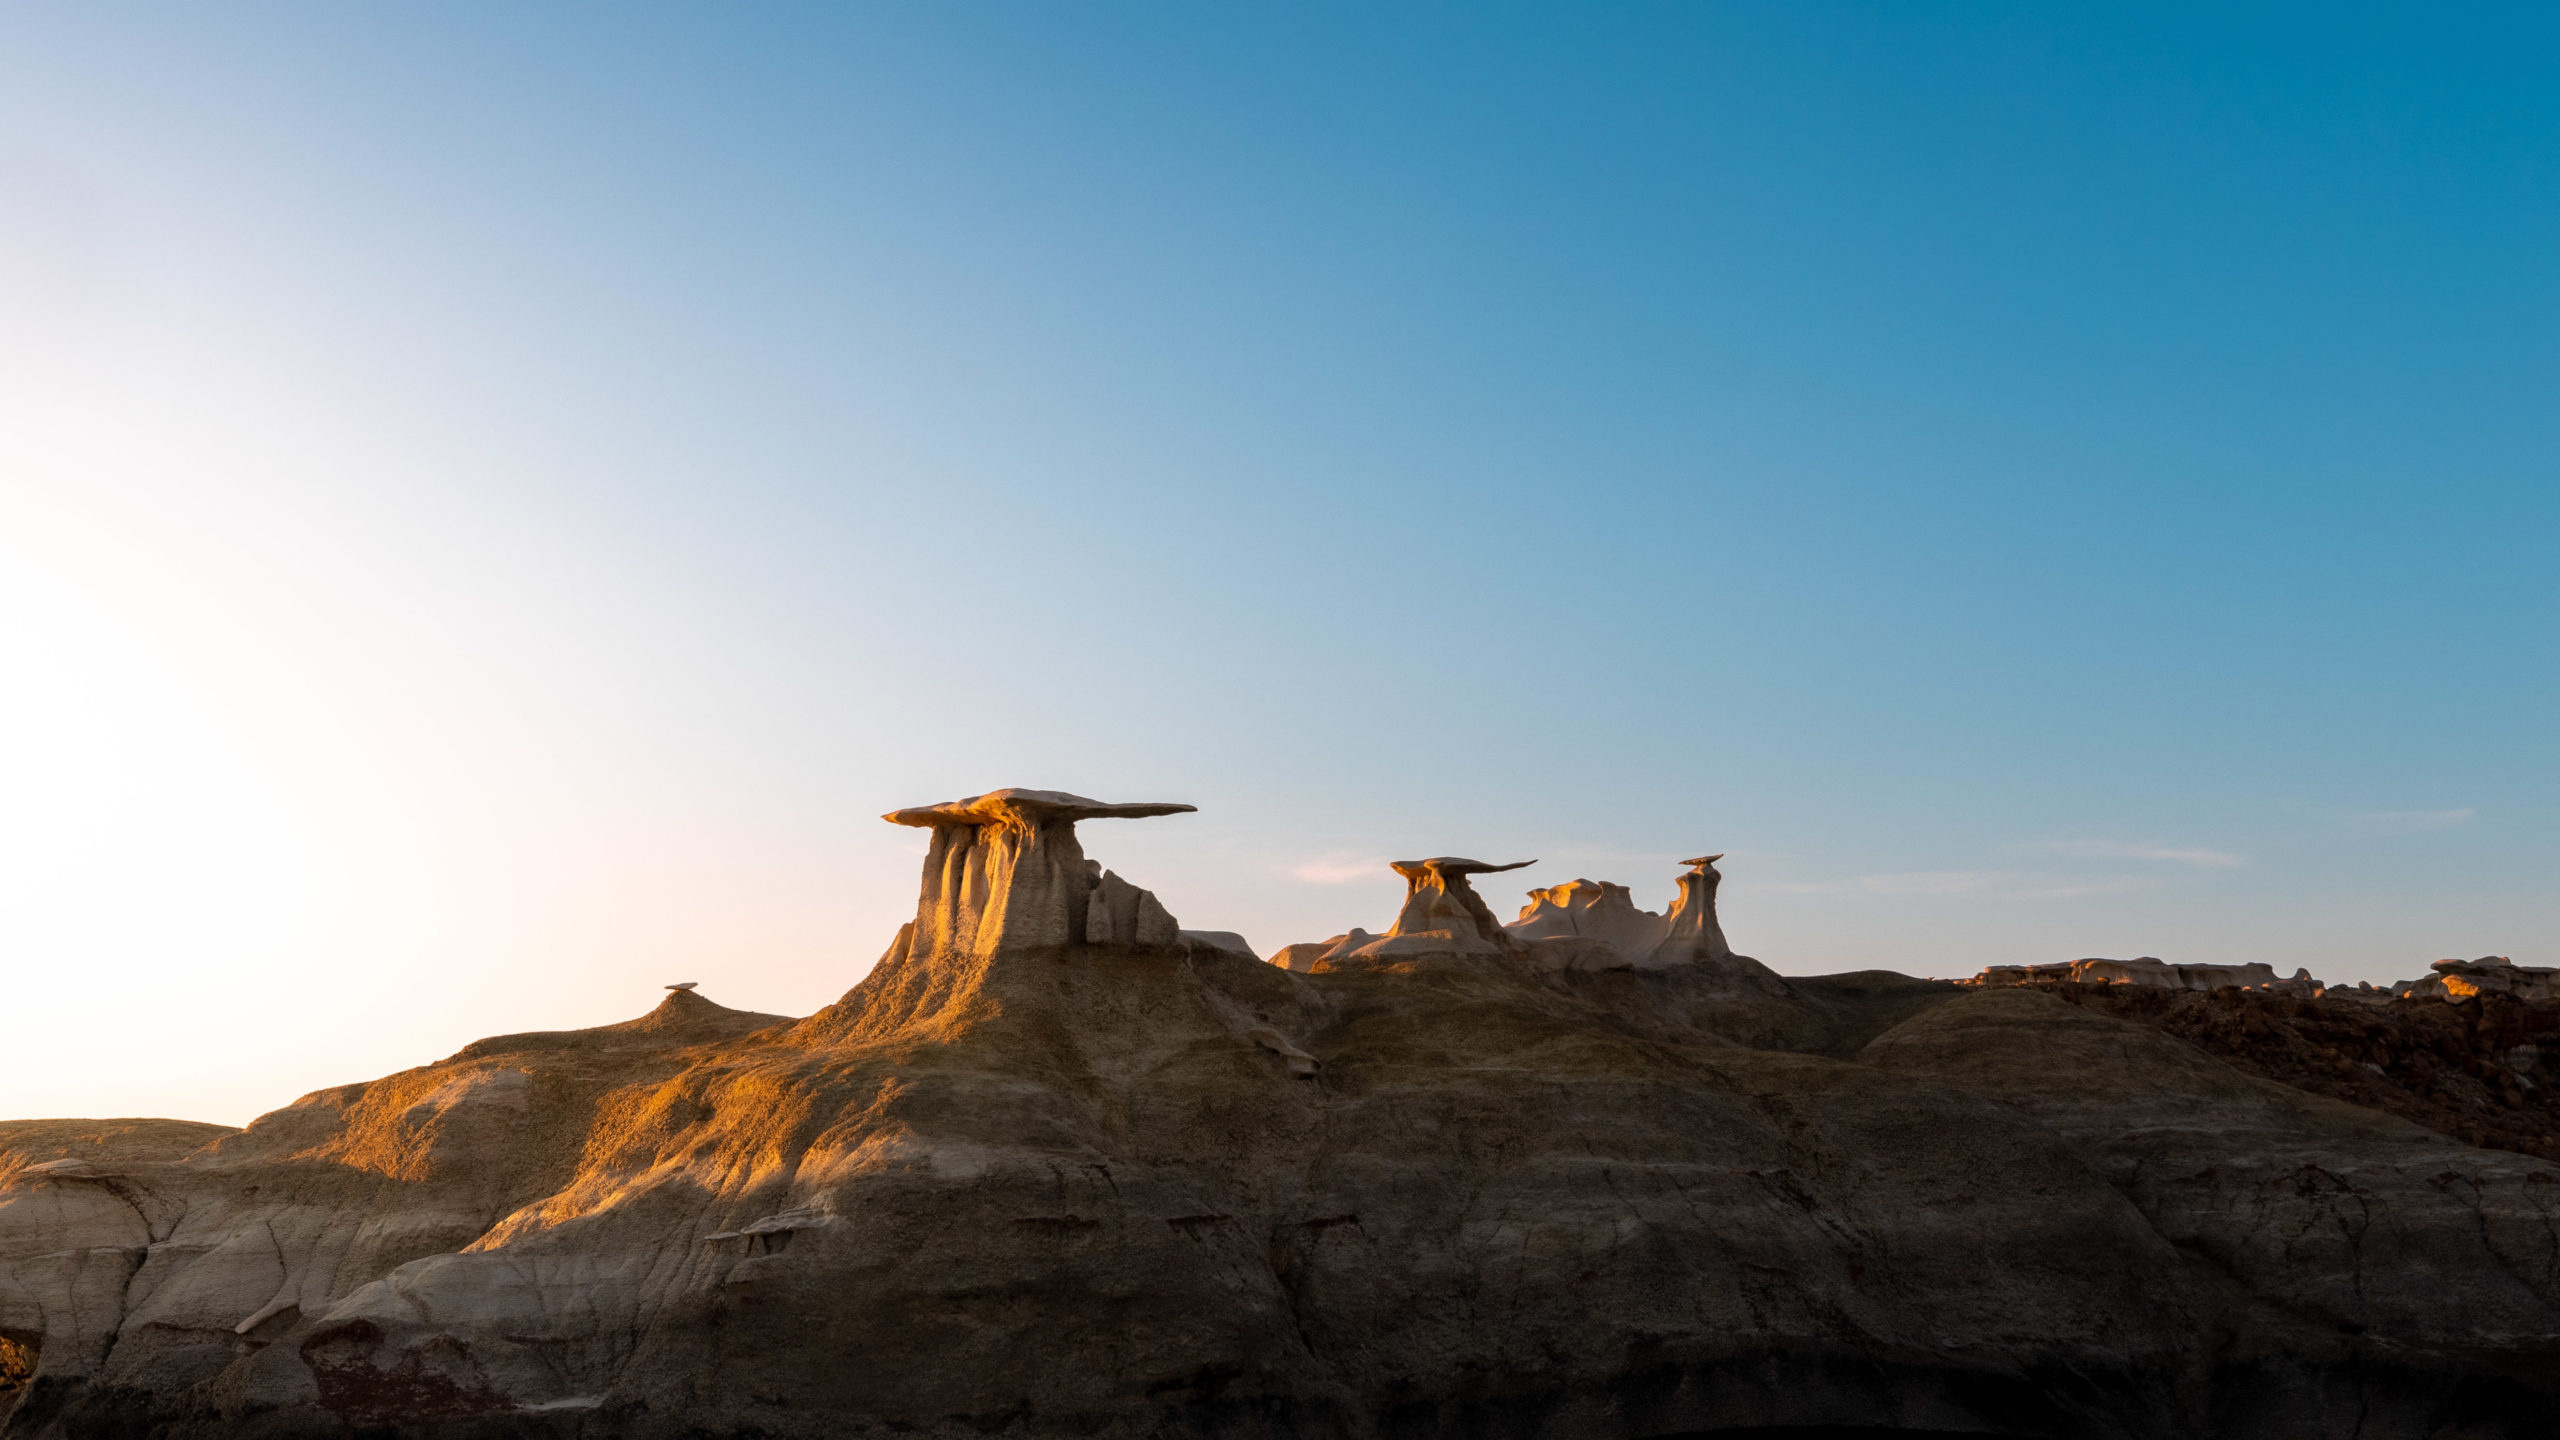 Bisti Badlands, Stone wings, Photography guide, Travels, 2560x1440 HD Desktop